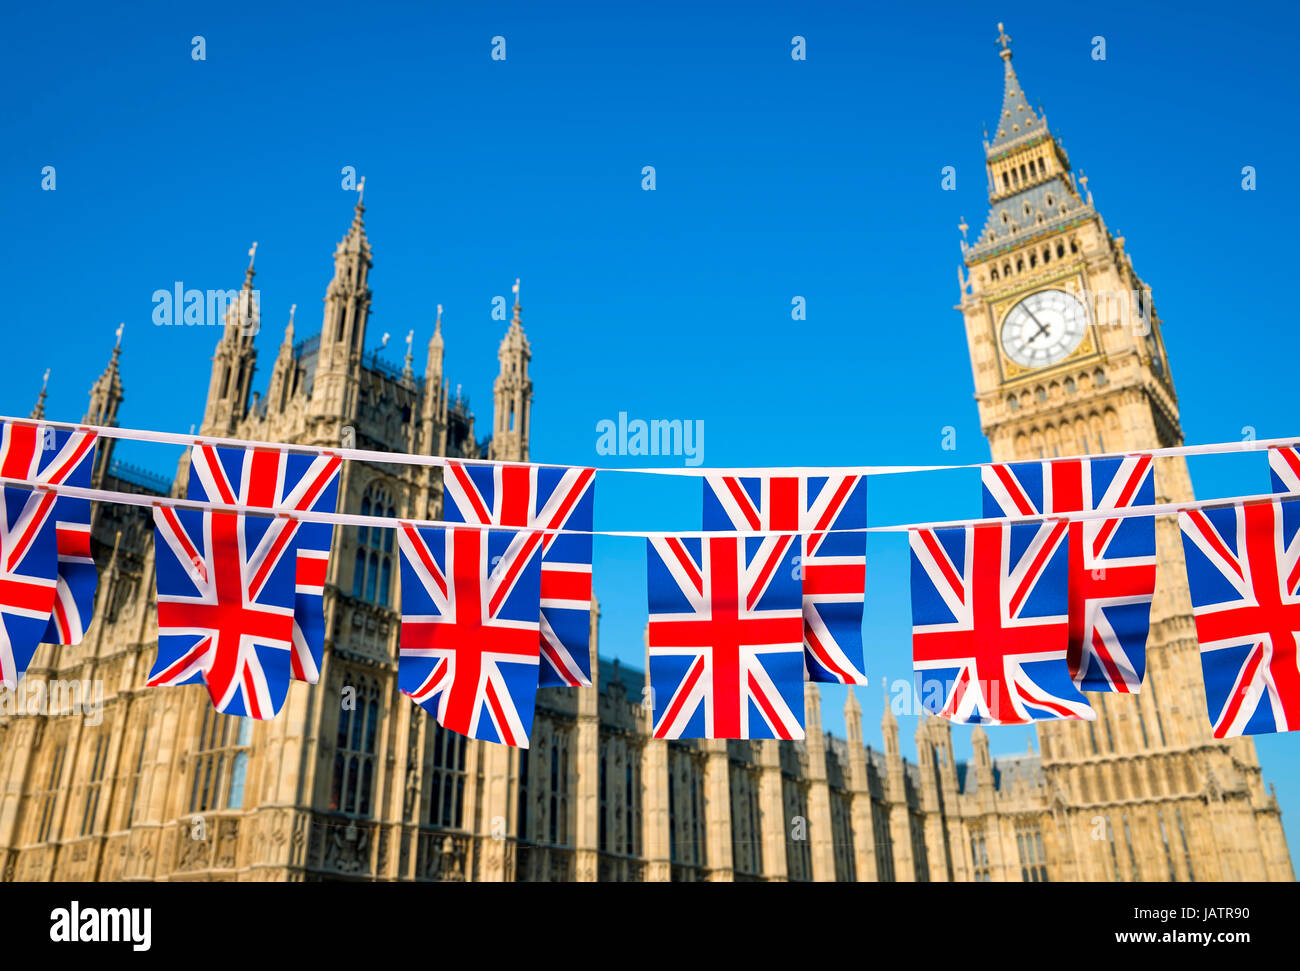 Two rows of Union Jack bunting flying in front of the Houses of Parliament at Westminster Palace with Big Ben under bright blue sky in London, England Stock Photo